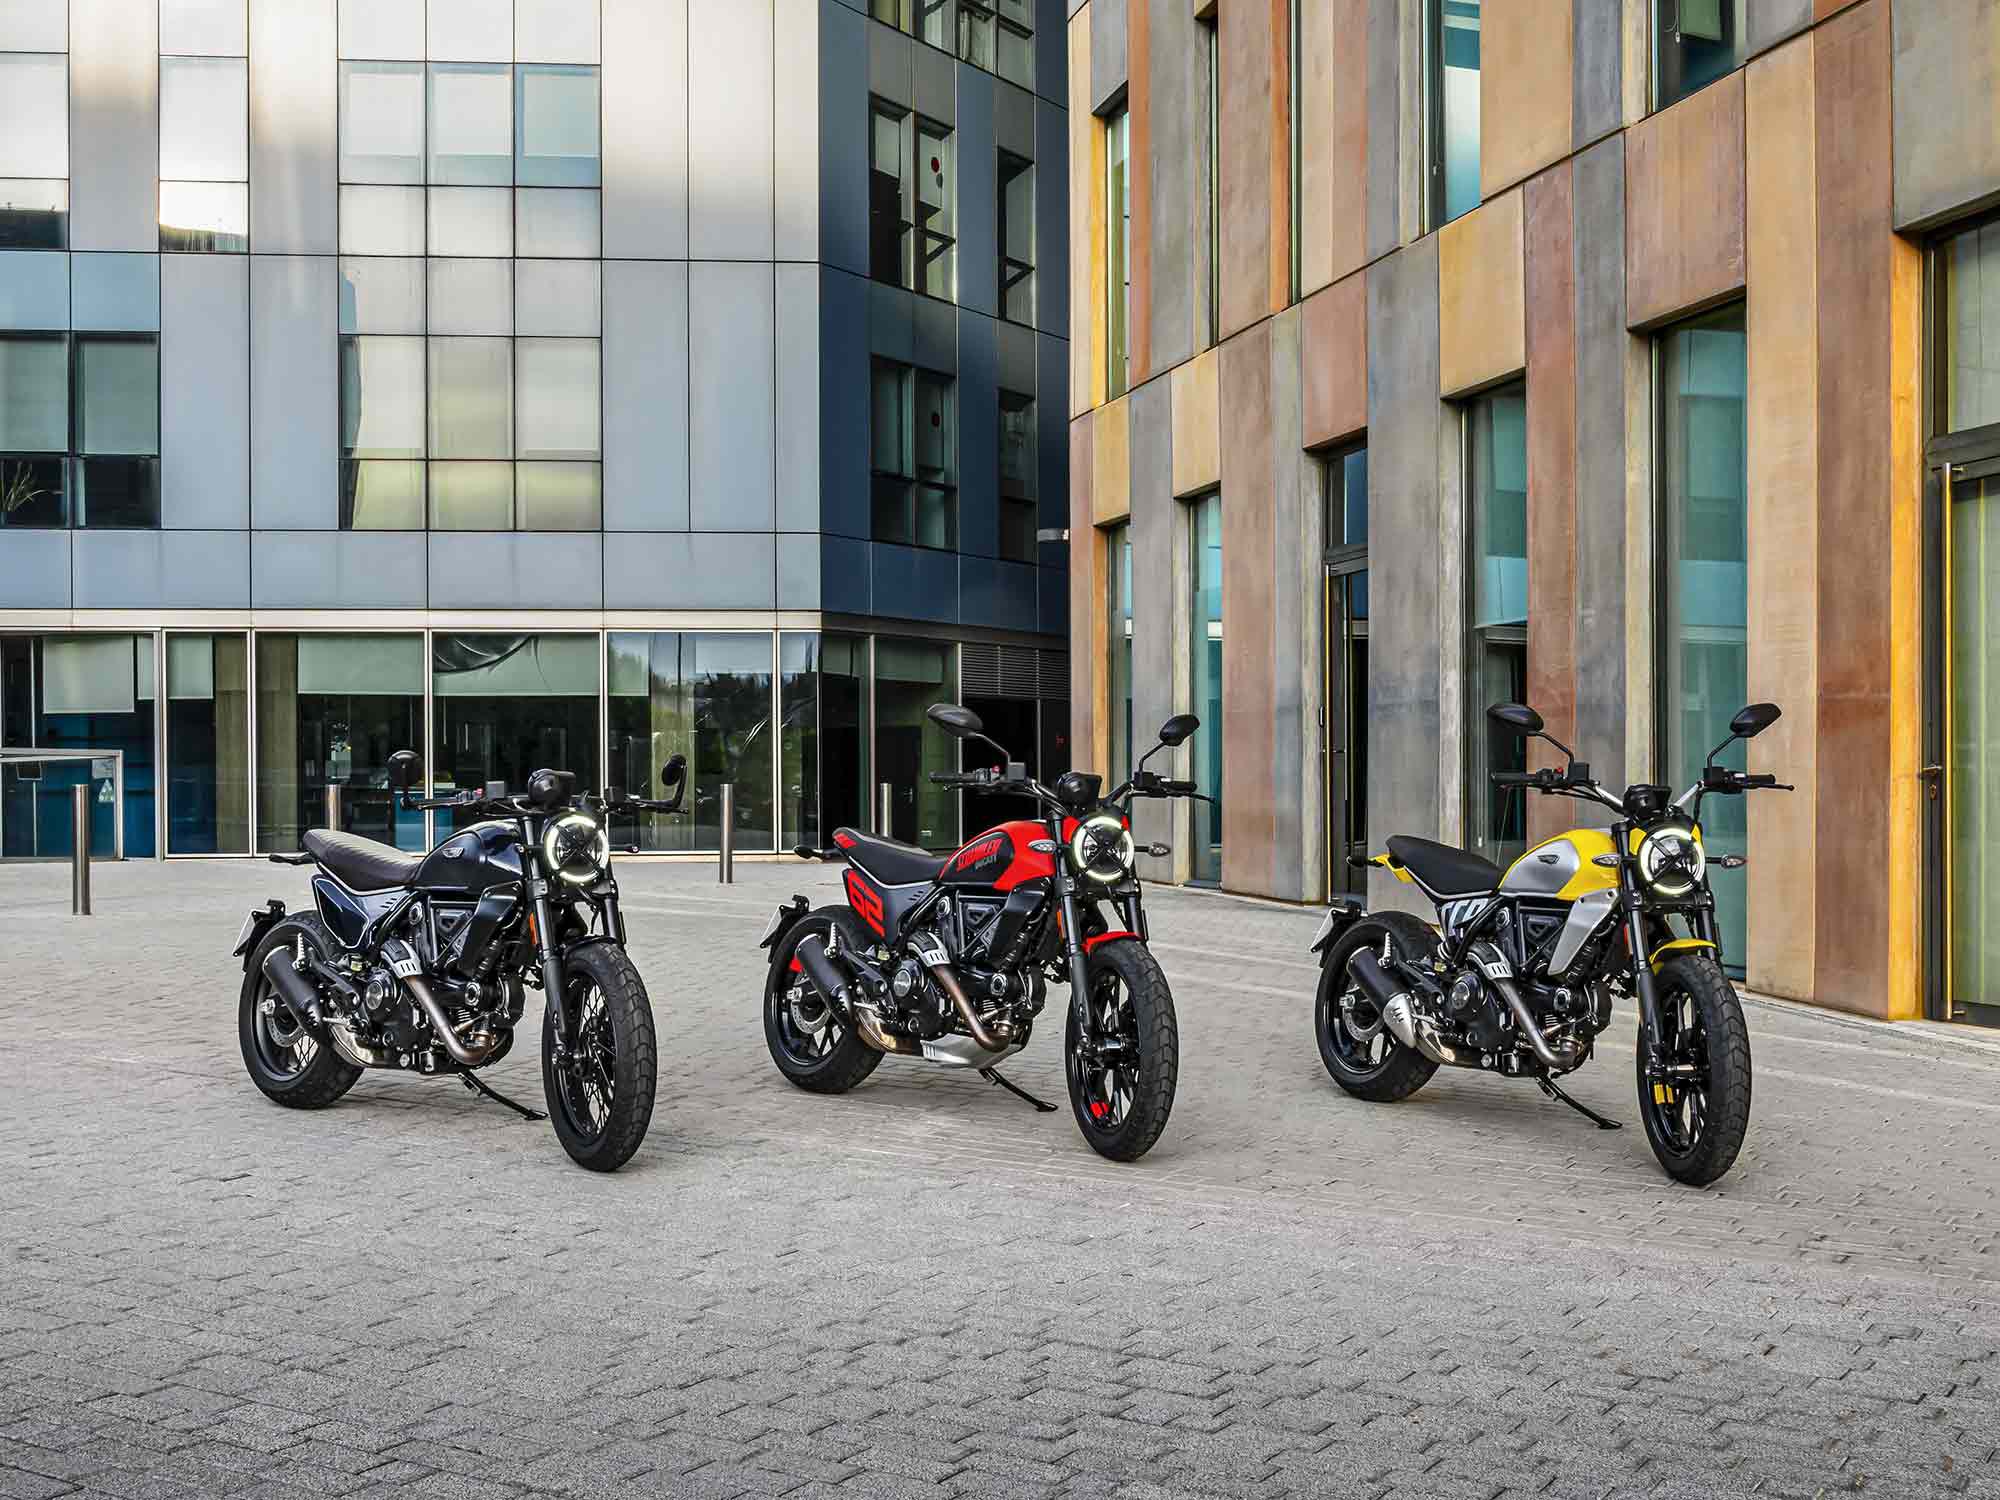 The Nightshift, Full Throttle, and Icon Scramblers lead the way in 2023.